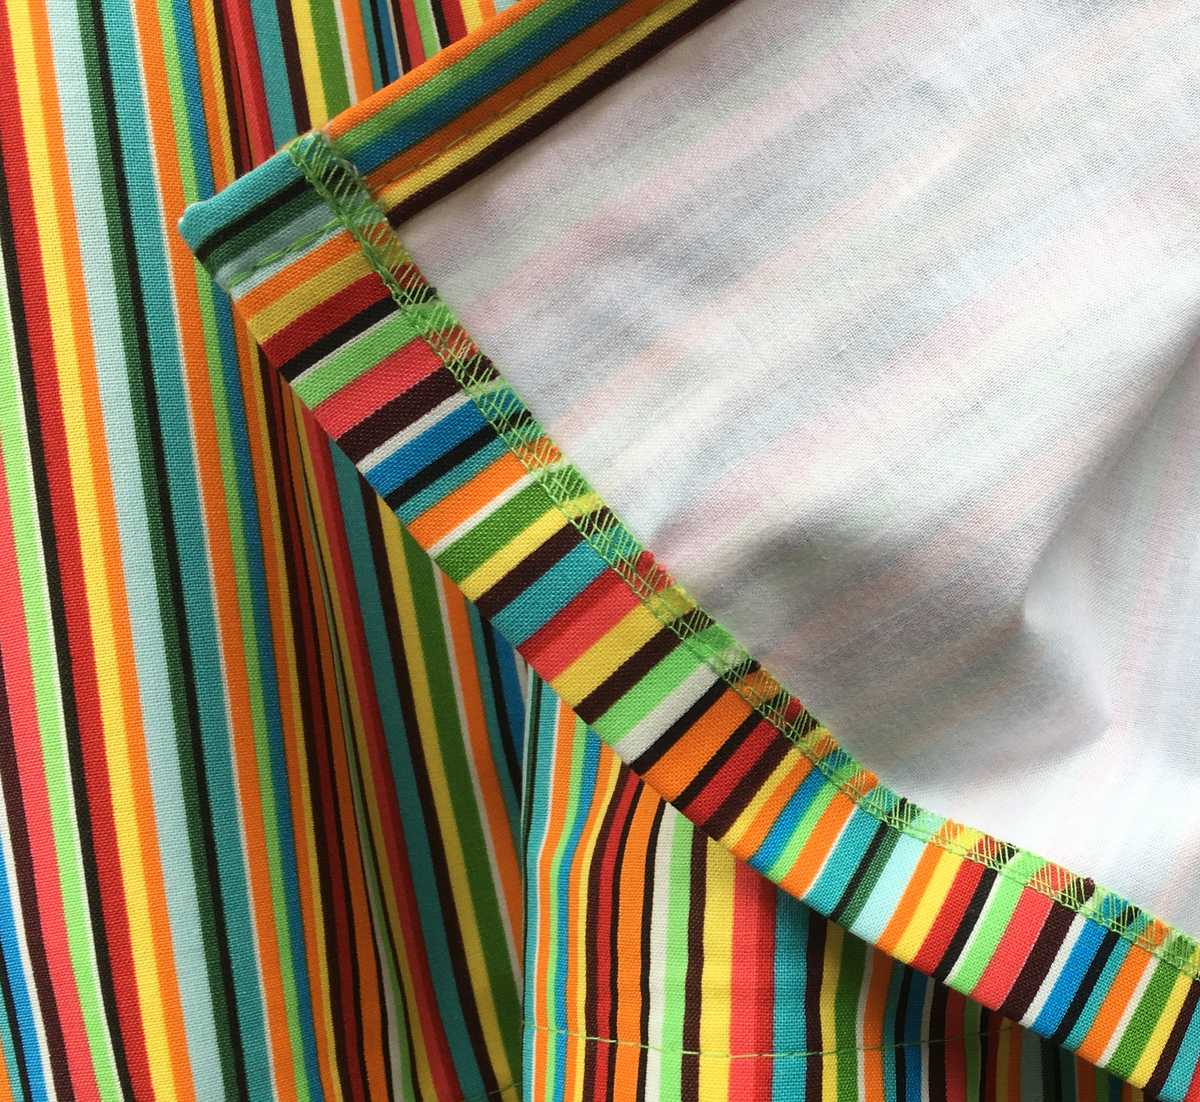 Rainbow Striped Red Blue Green Yellow White Stripes Handcrafted Cotton Lined Curtain Valance